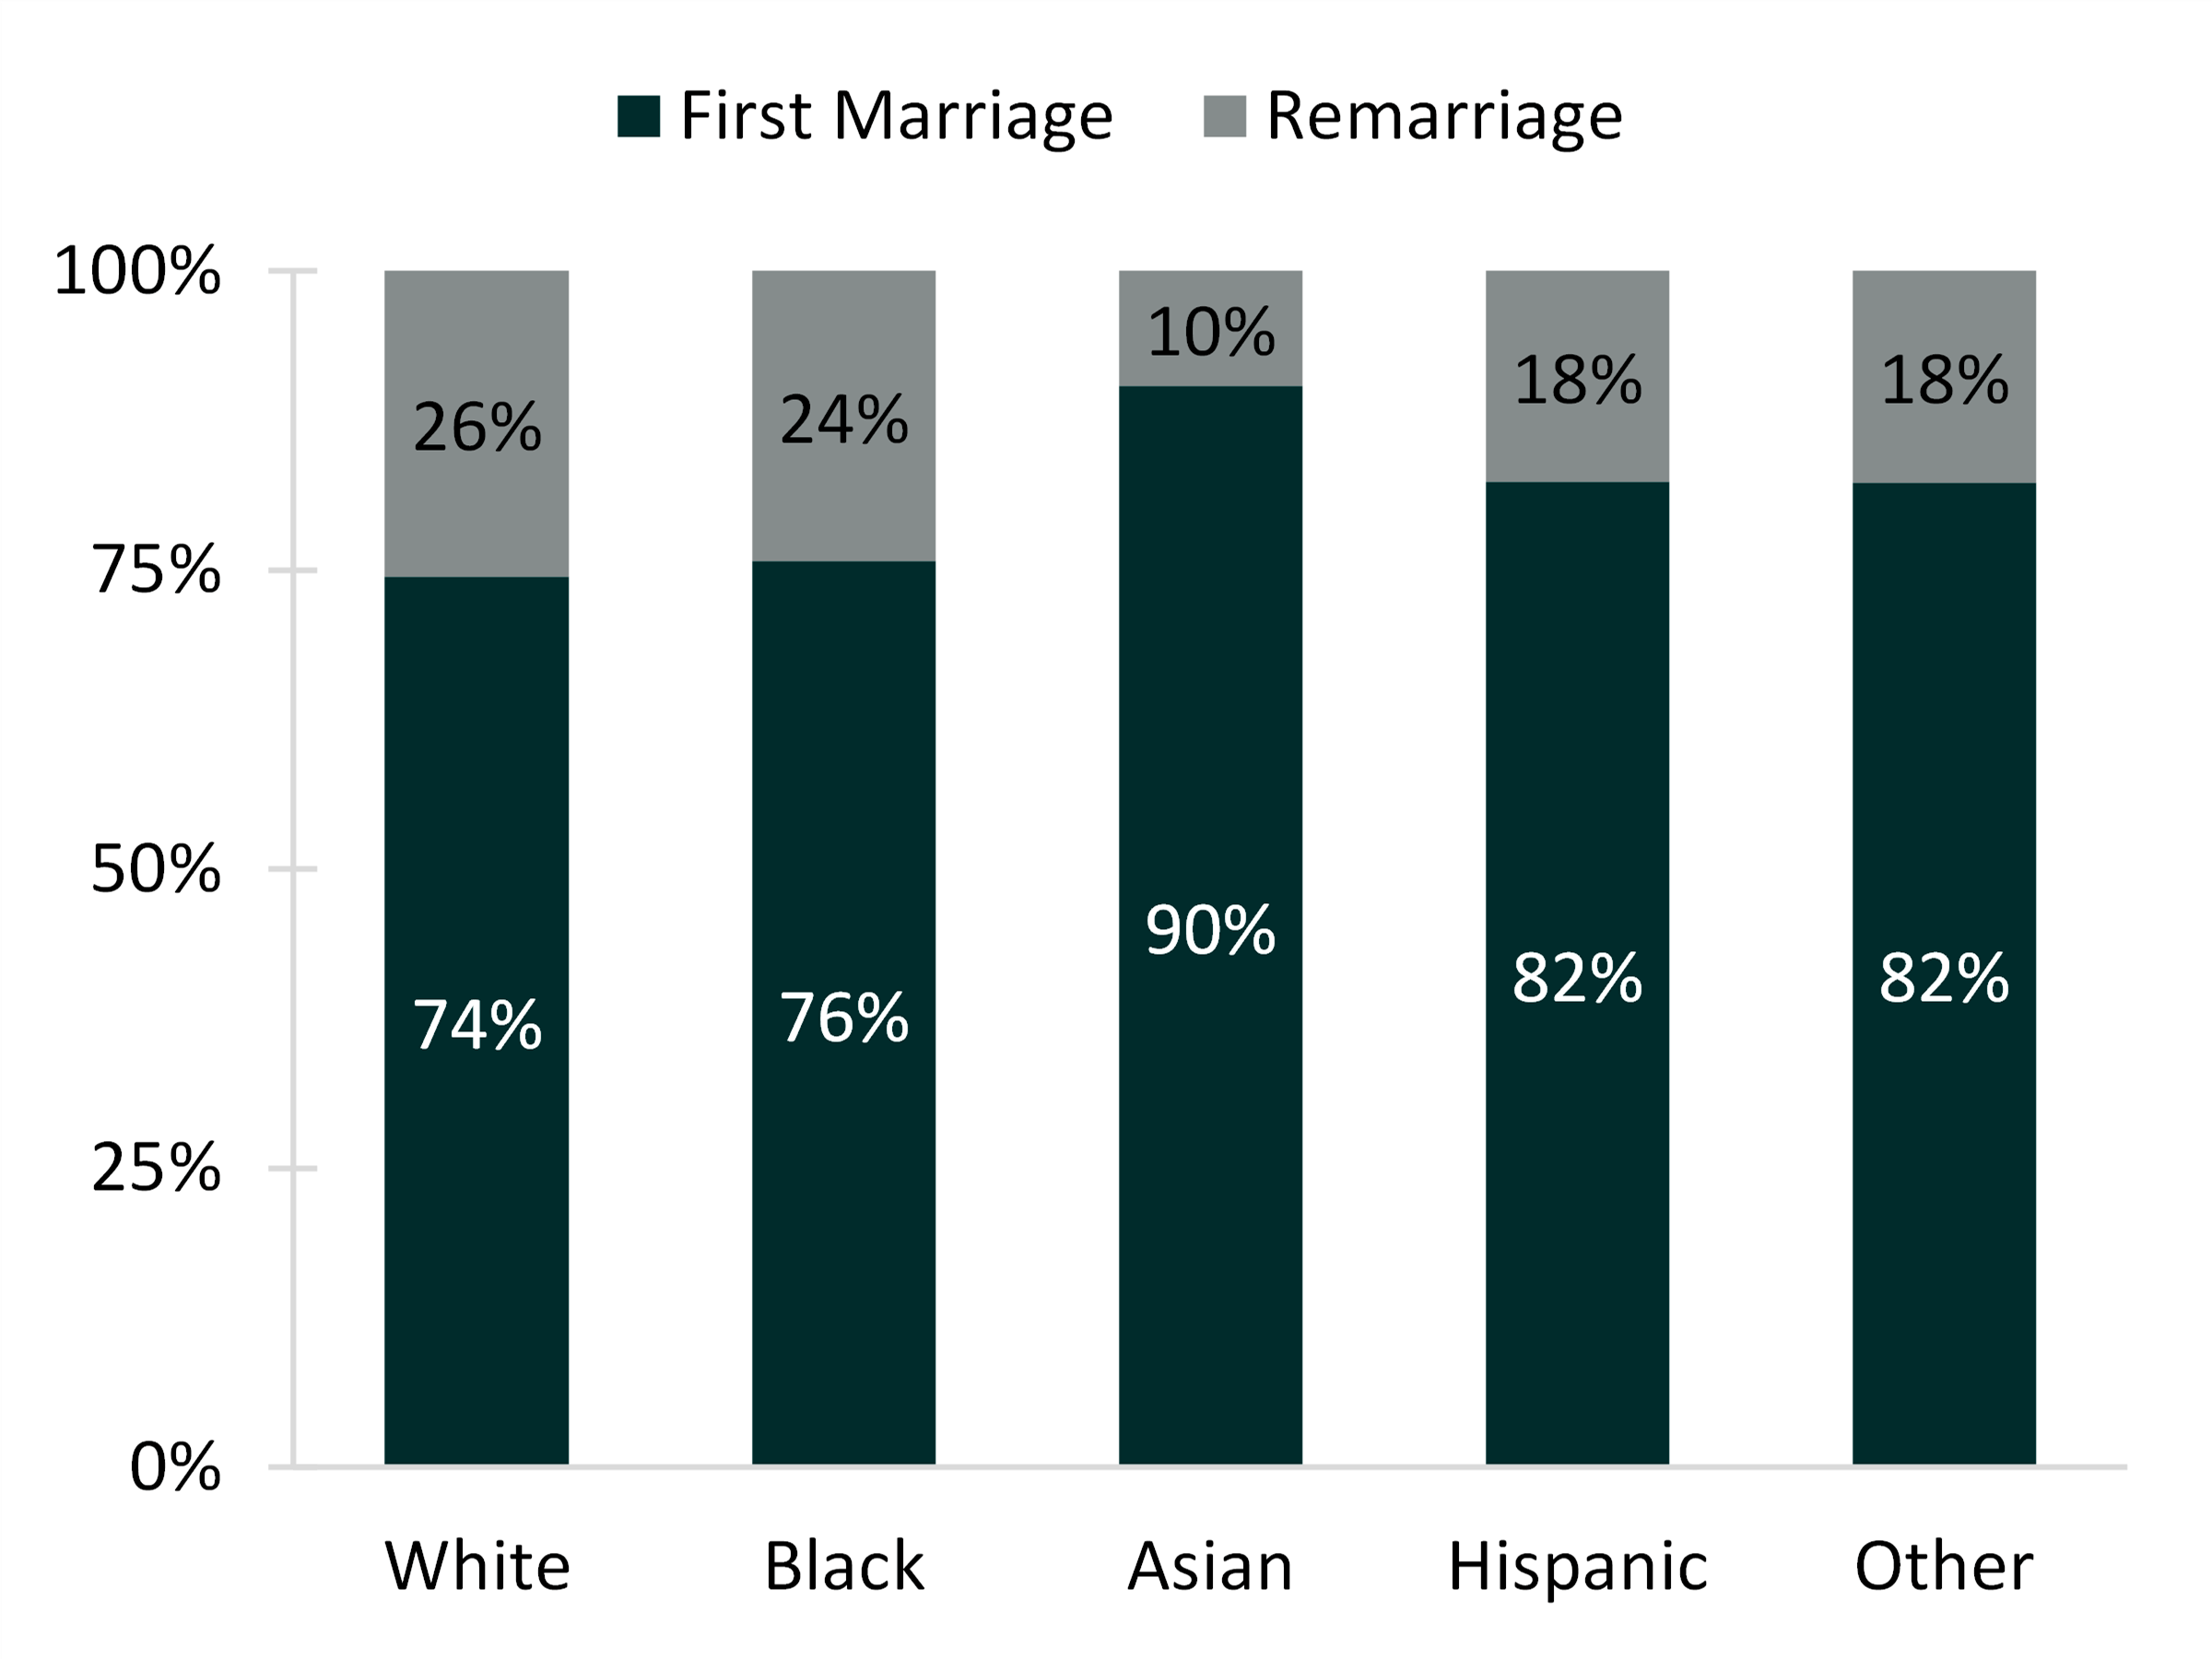 teal bar chart showing Figure 4. Currently Married Adults in a First Marriage and Remarriage by Race/Ethnicity, 2018